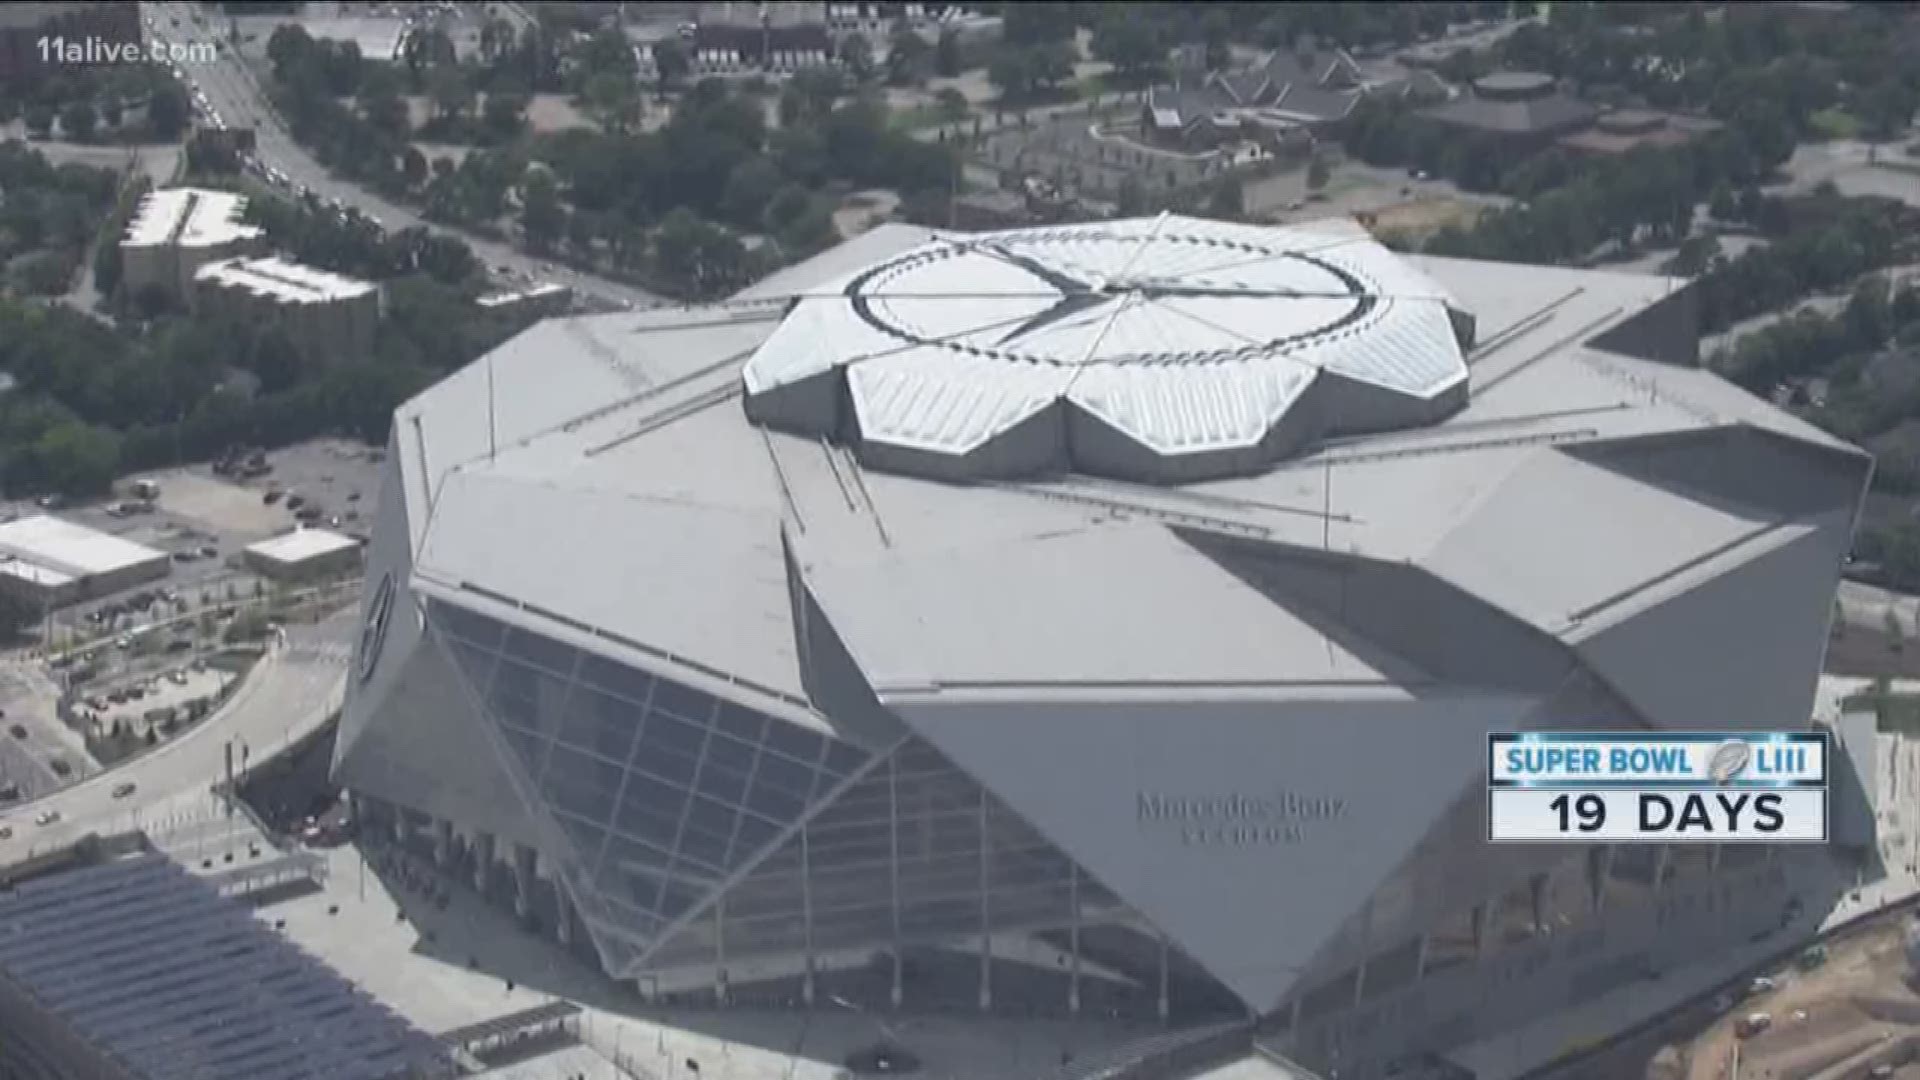 Atlanta Mayor Keisha Lance Bottoms and members of the Public Safety Executive Steering Committee for Super Bowl LIII spoke on their confidence in their plan.